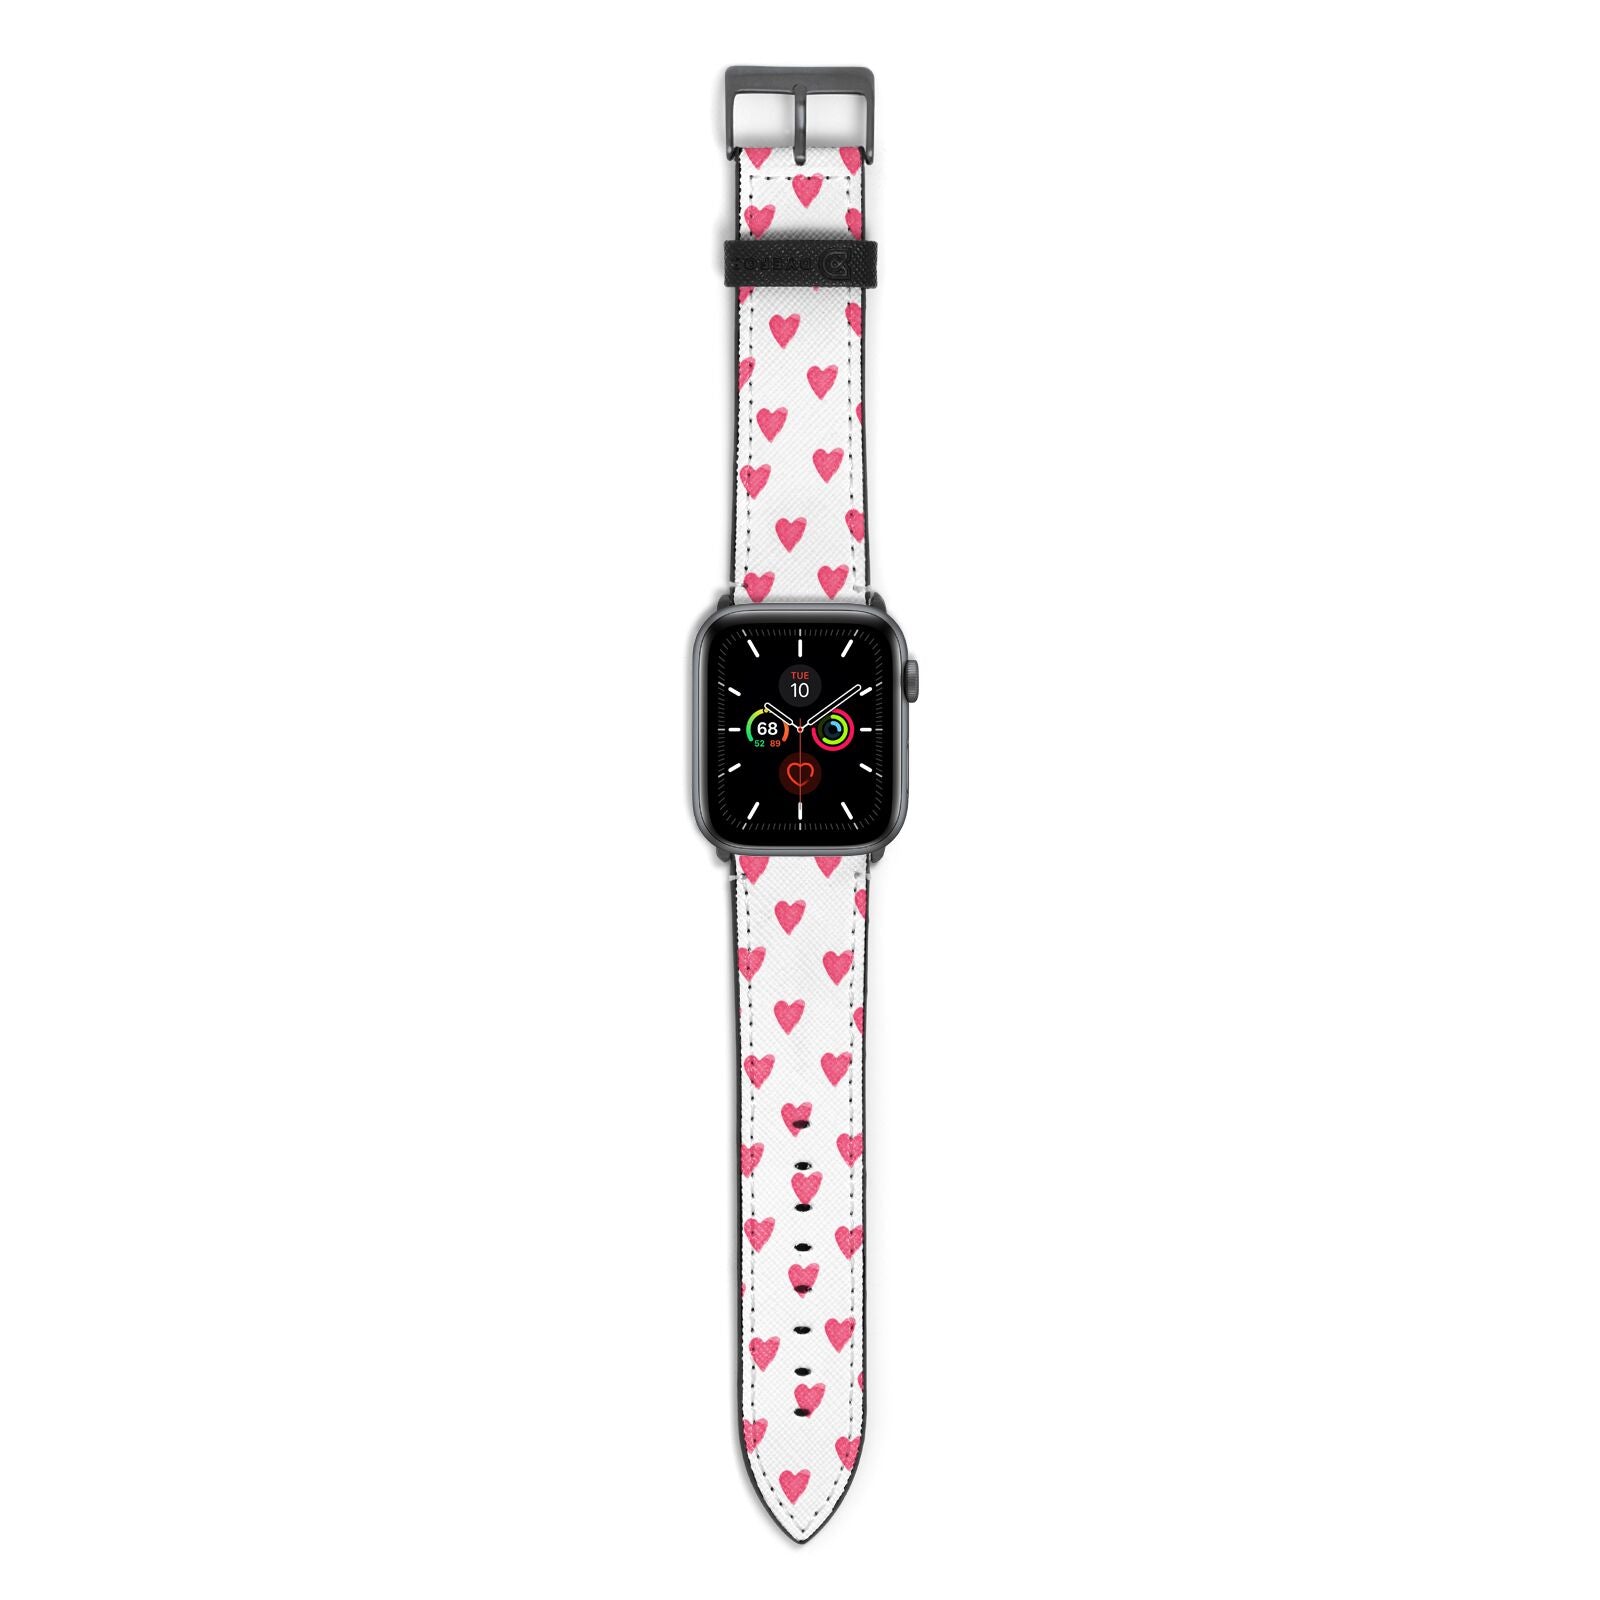 Heart Patterned Apple Watch Strap with Space Grey Hardware